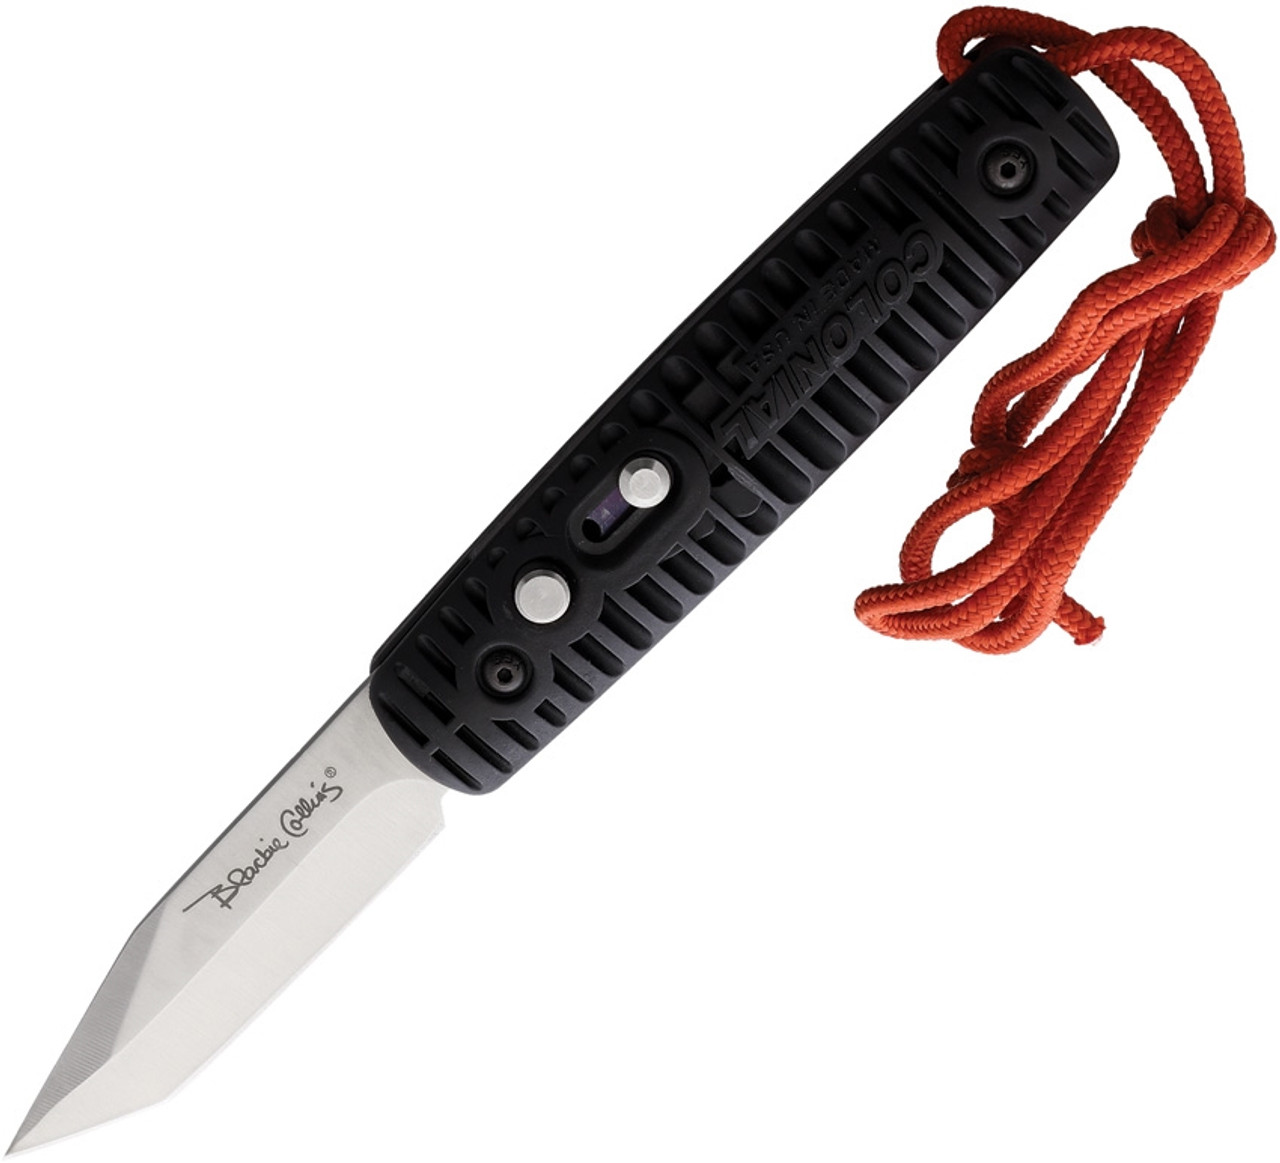 Colonial Knife Auto Ranger(Col105) 4.25" Tanto Drop Point Plain Blade,Black Polymer Handle